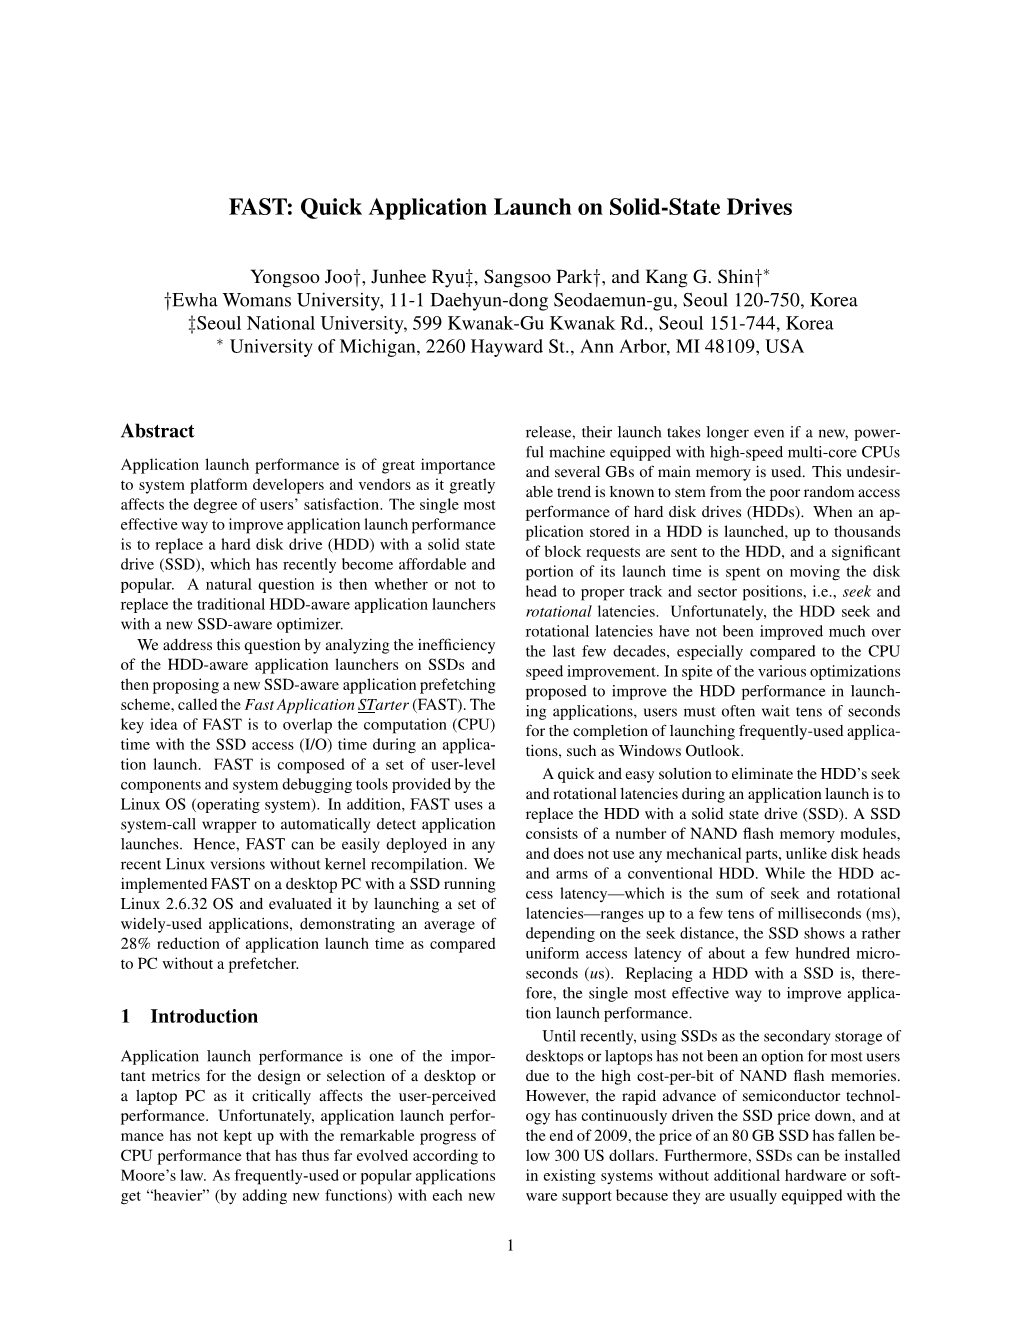 FAST: Quick Application Launch on Solid-State Drives